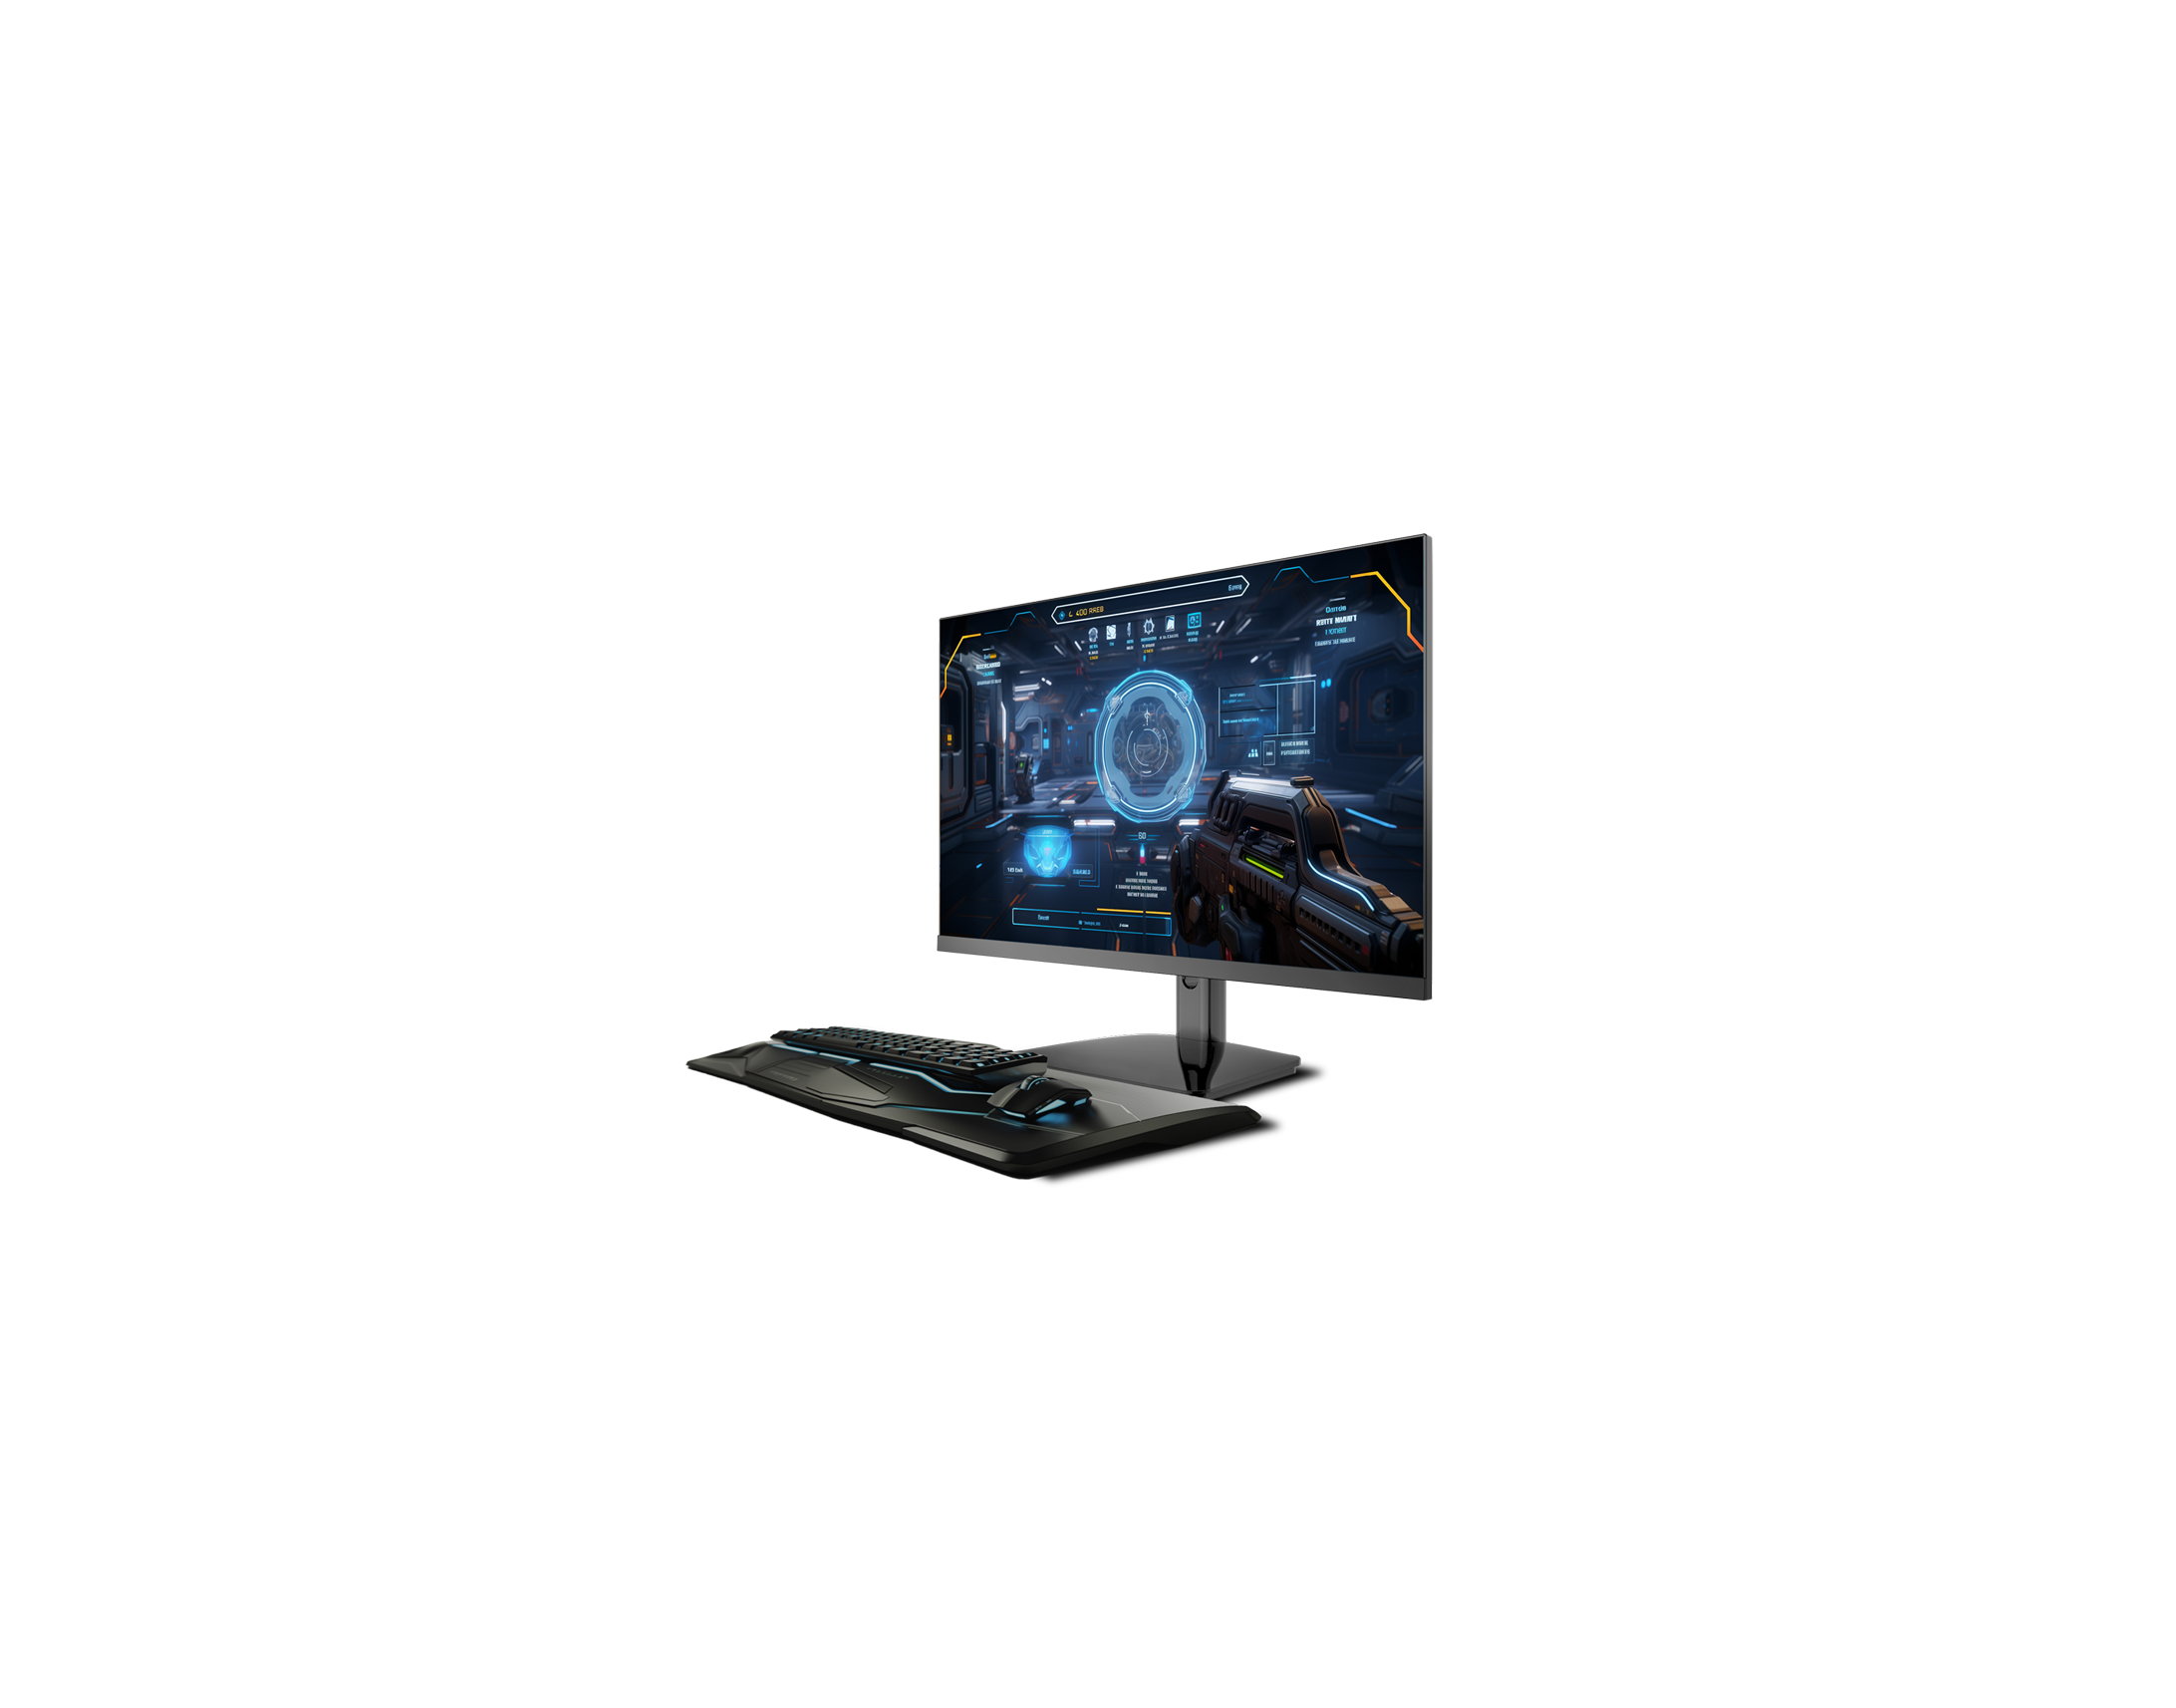 A 24 inch IPS Minifire X5G Gaming Monitor displays the gaming screen